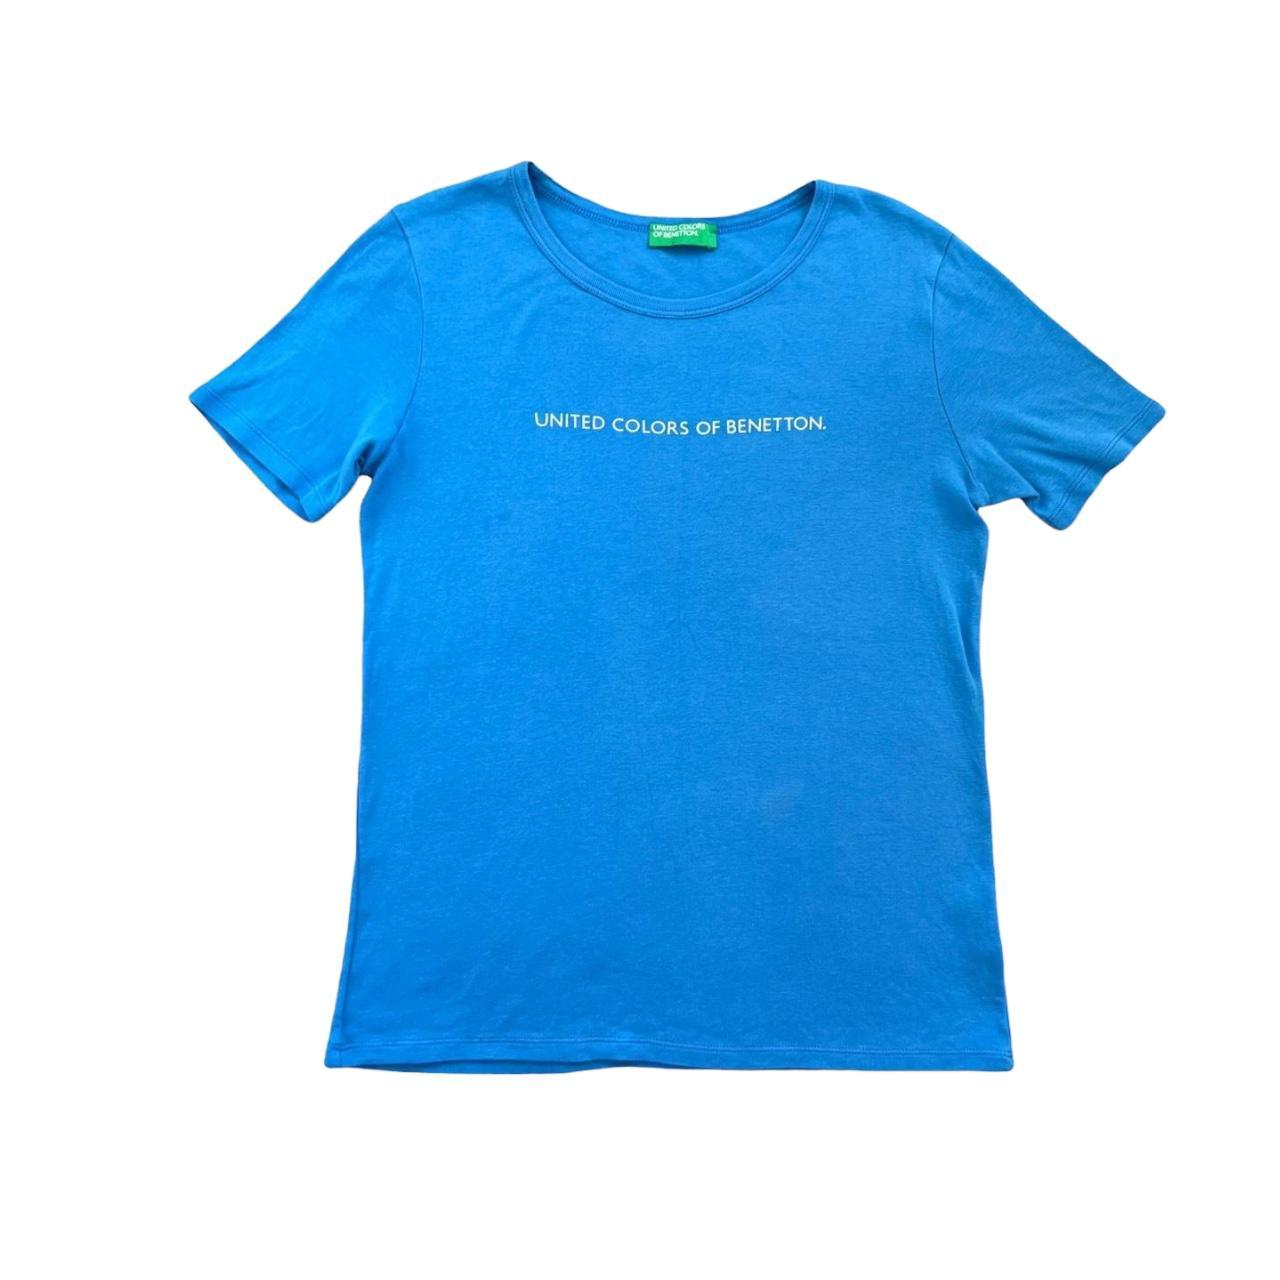 United Colours of Benetton t shirt in blue with... - Depop